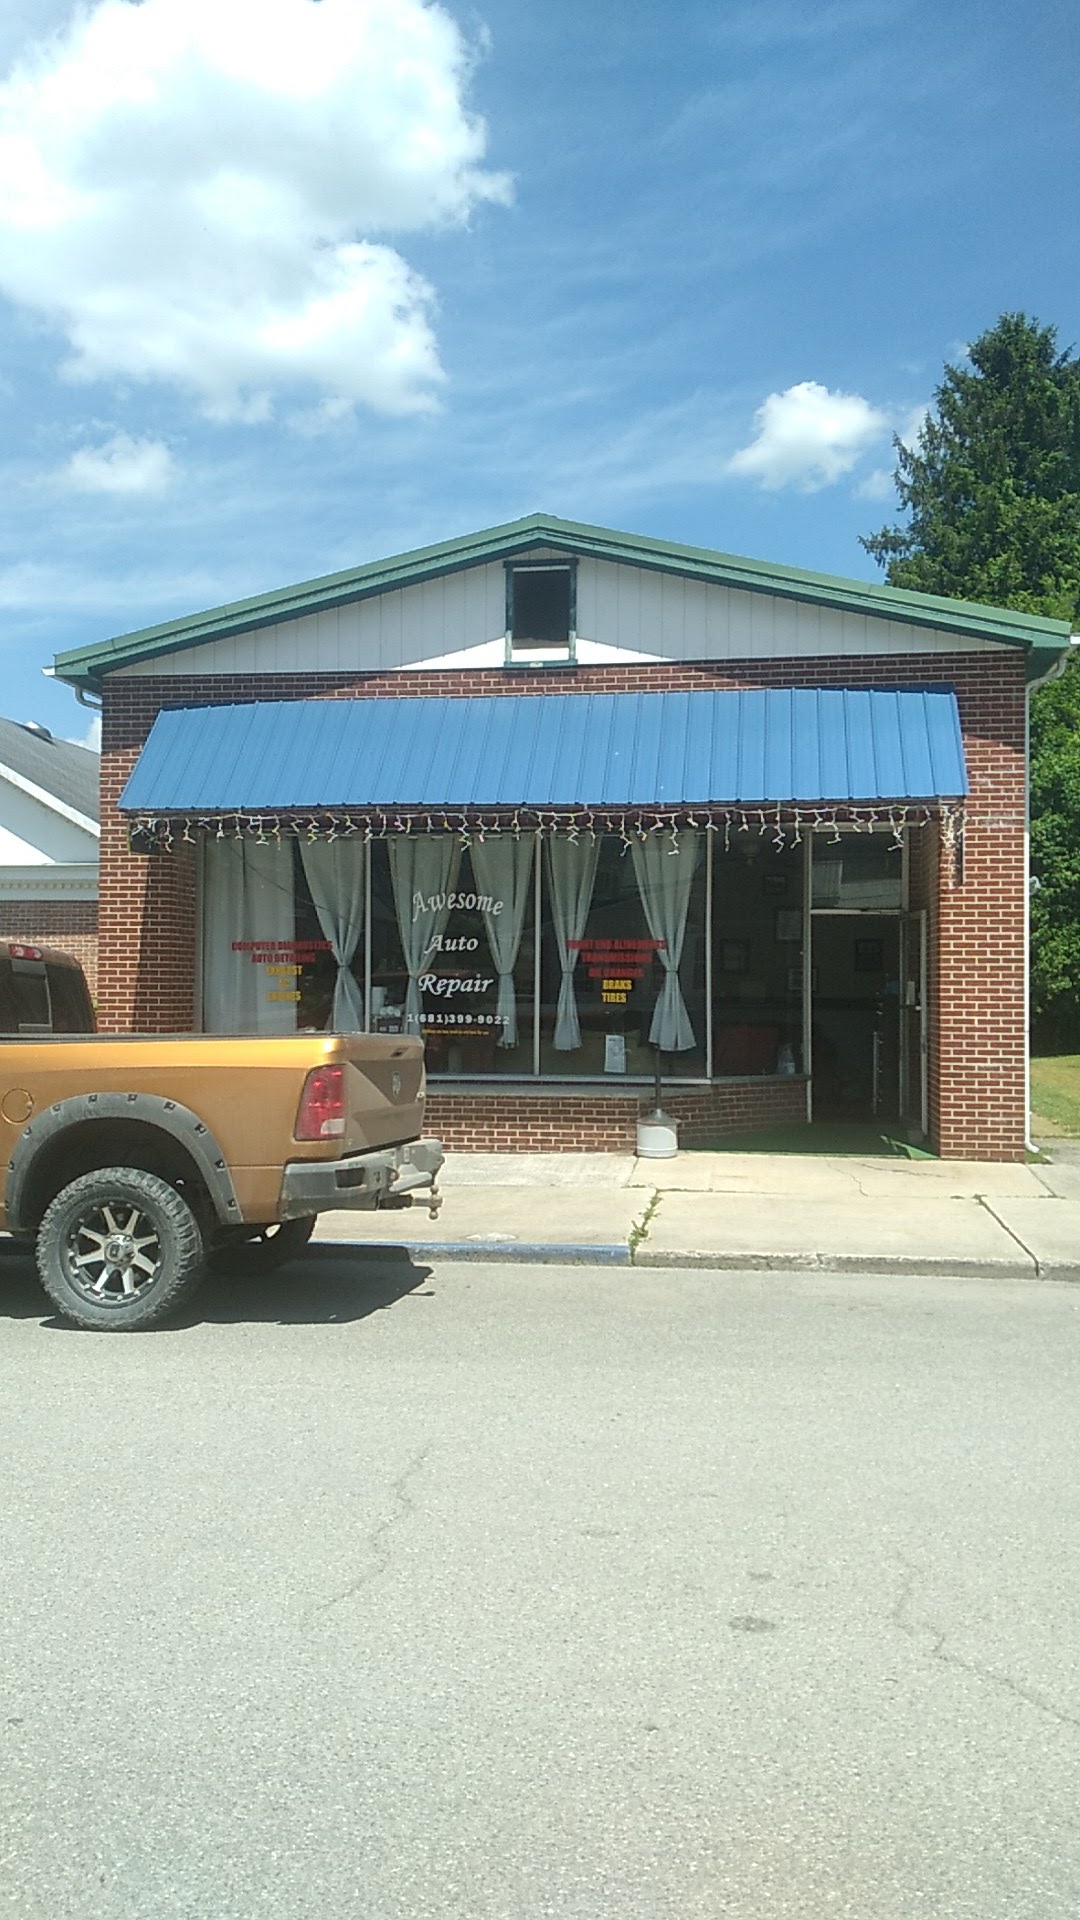 Awesome Auto Repair 218 Walnut St, Parsons West Virginia 26287